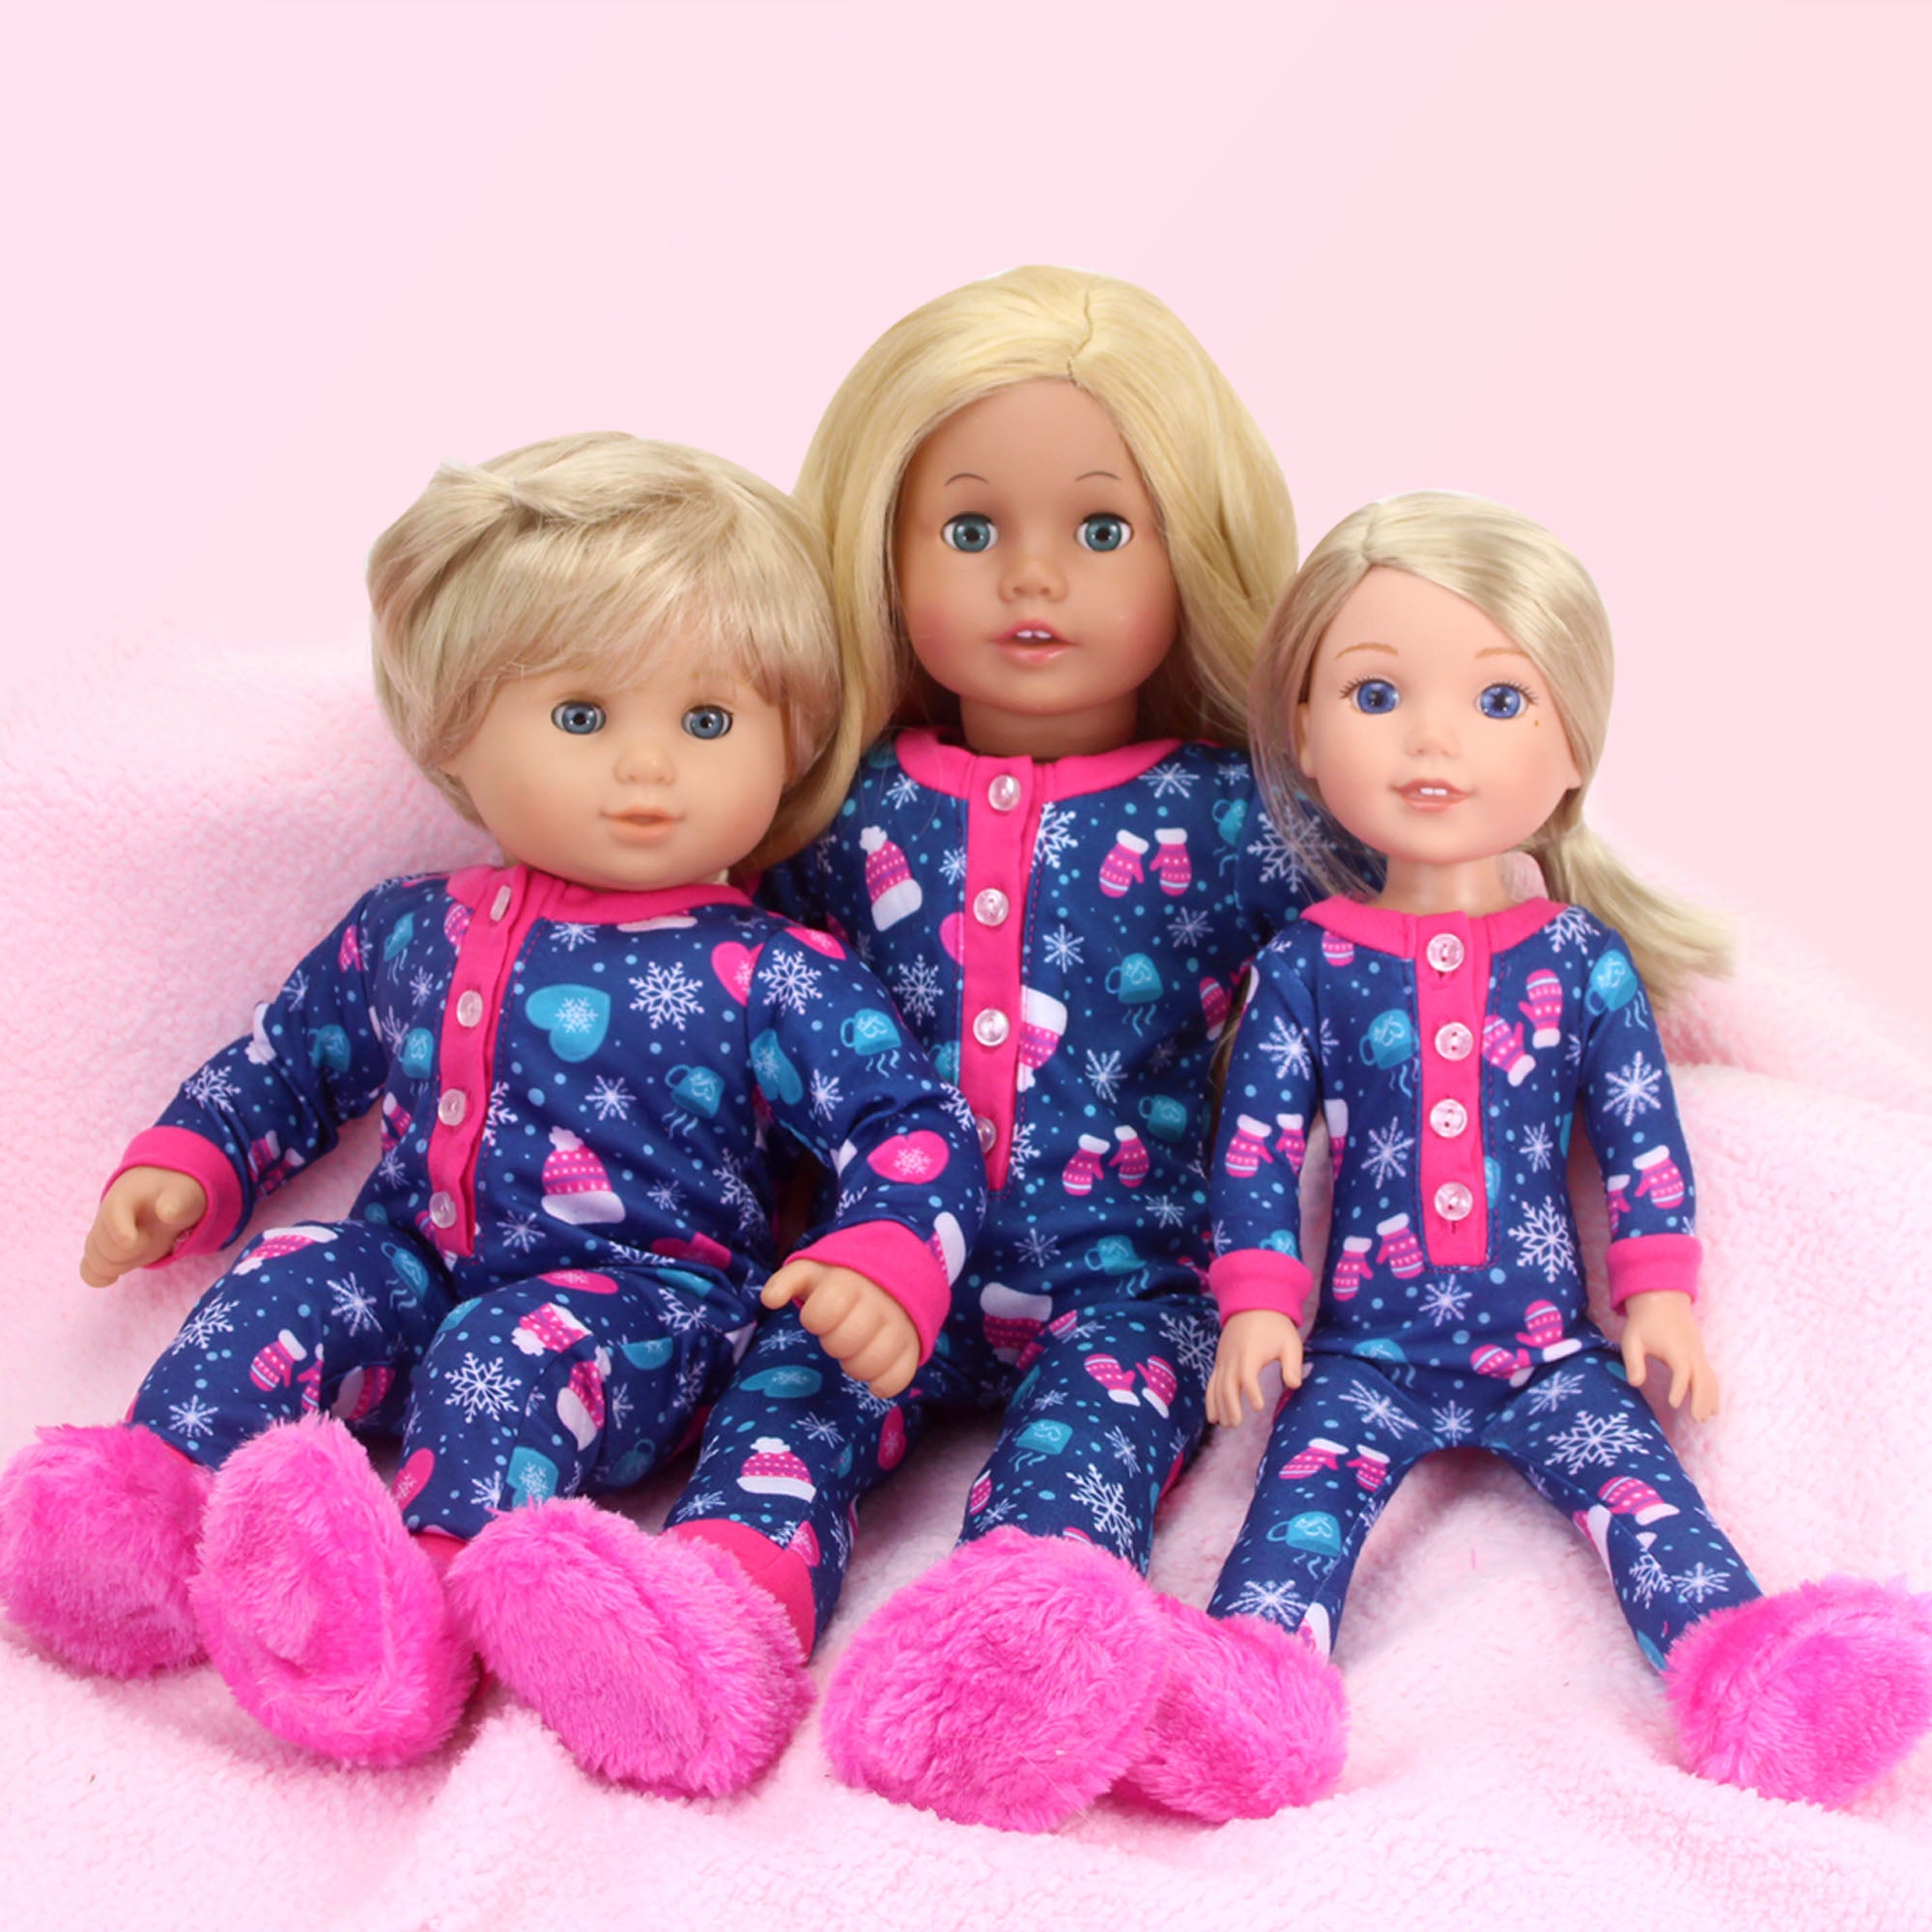 Sophia's One Piece Winter Pajamas and Slippers for 14.5" Dolls, Blue/Hot Pink